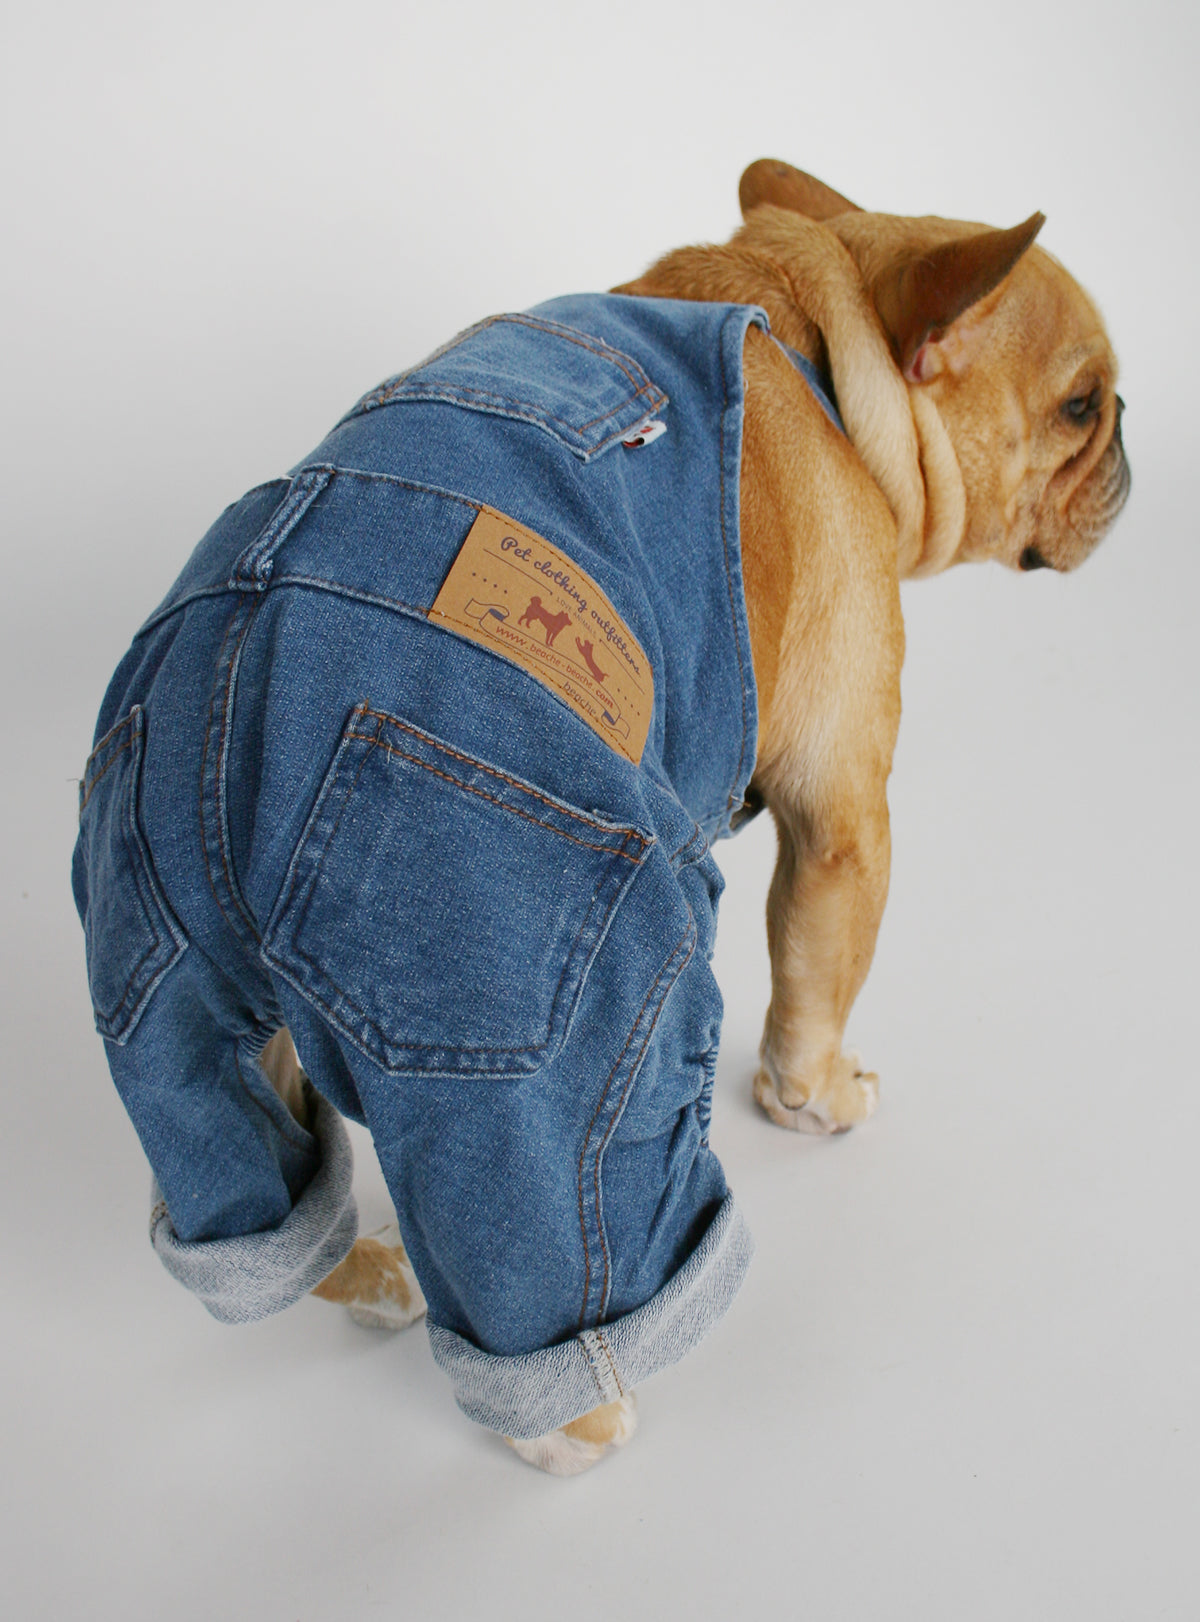 Amazon.com : Dog Jeans Hoodies Coat Pet Clothes Denim Jumpsuit Overall Cute  Dog Outfits Soft Classic Dog Jacket Blue Vintage Dog Clothes for Small  Medium Dogs and Cats : Pet Supplies